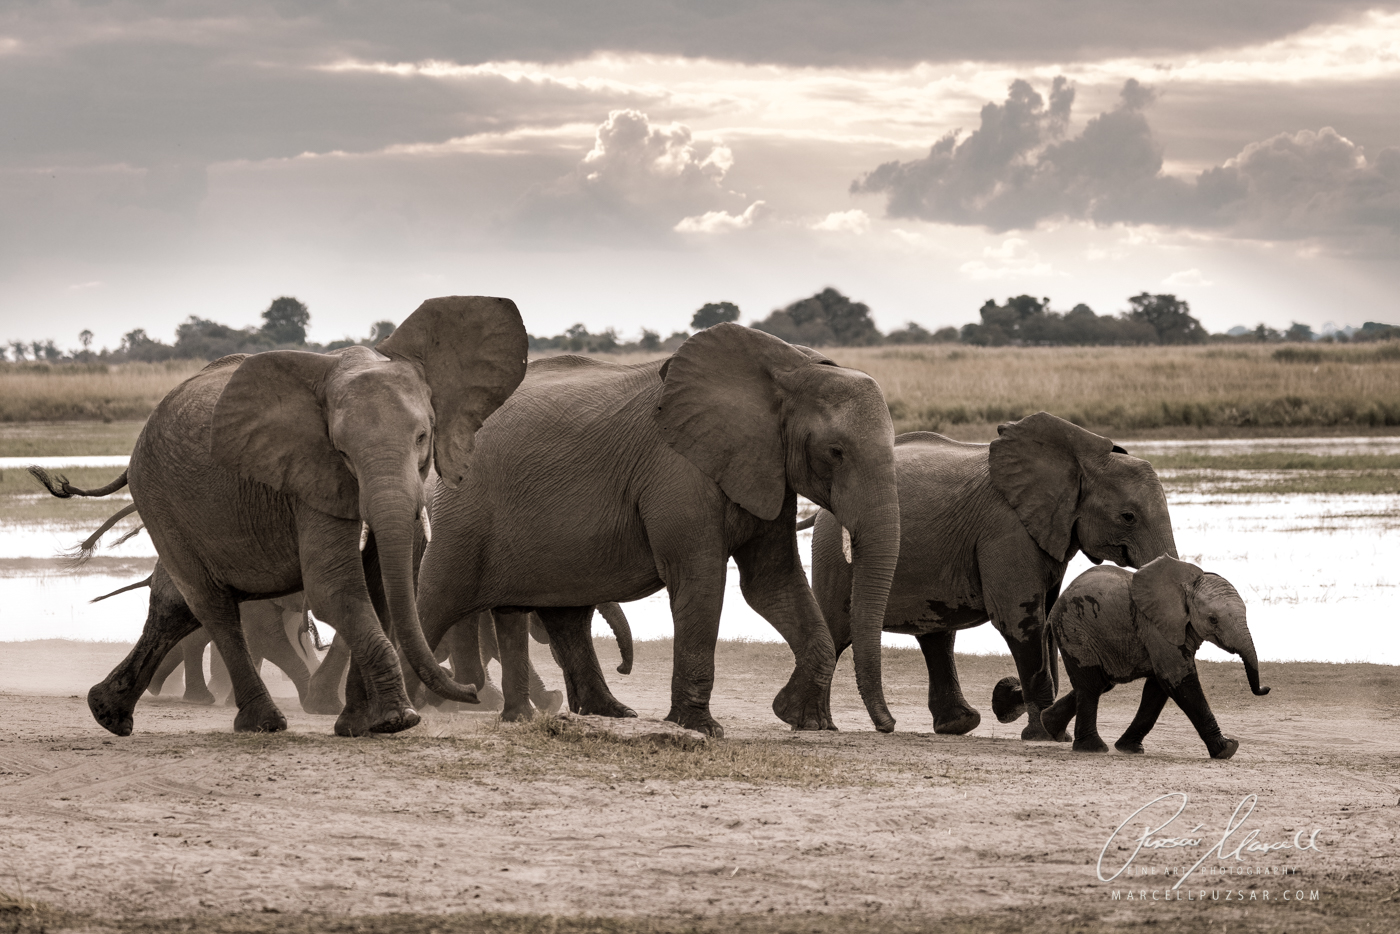 A group of elephants had just finished drinking and are on their way back
to the bush while protecting their babies.

Fine Art Limited Edition of 35.